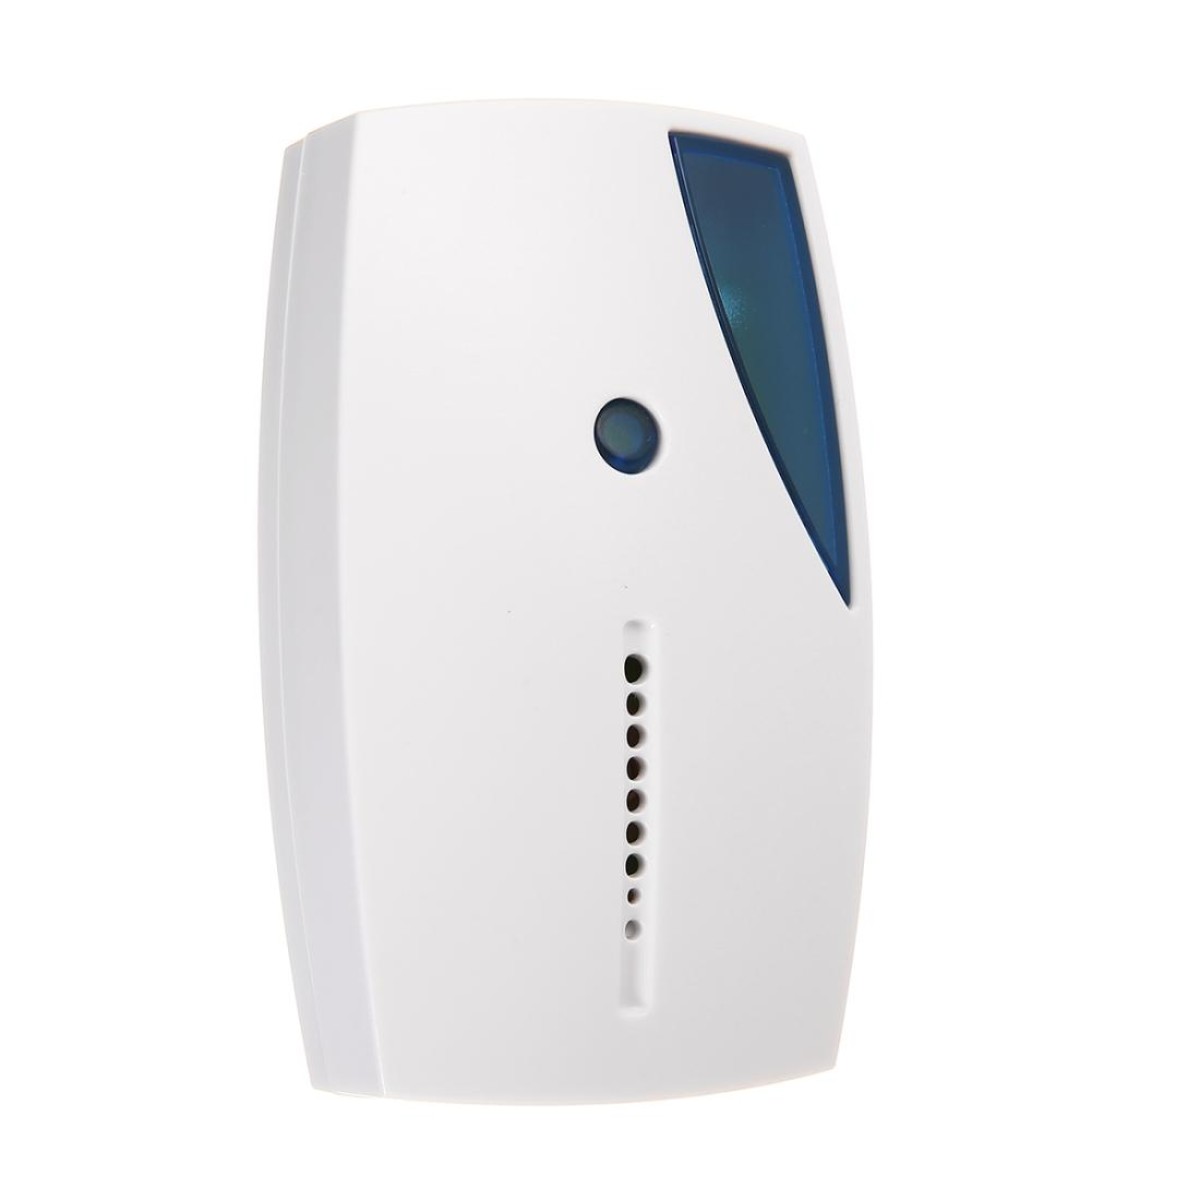 513E Waterproof LED Wireless Doorbell Remote Control Door Bell with 36 Tune Chimes Songs